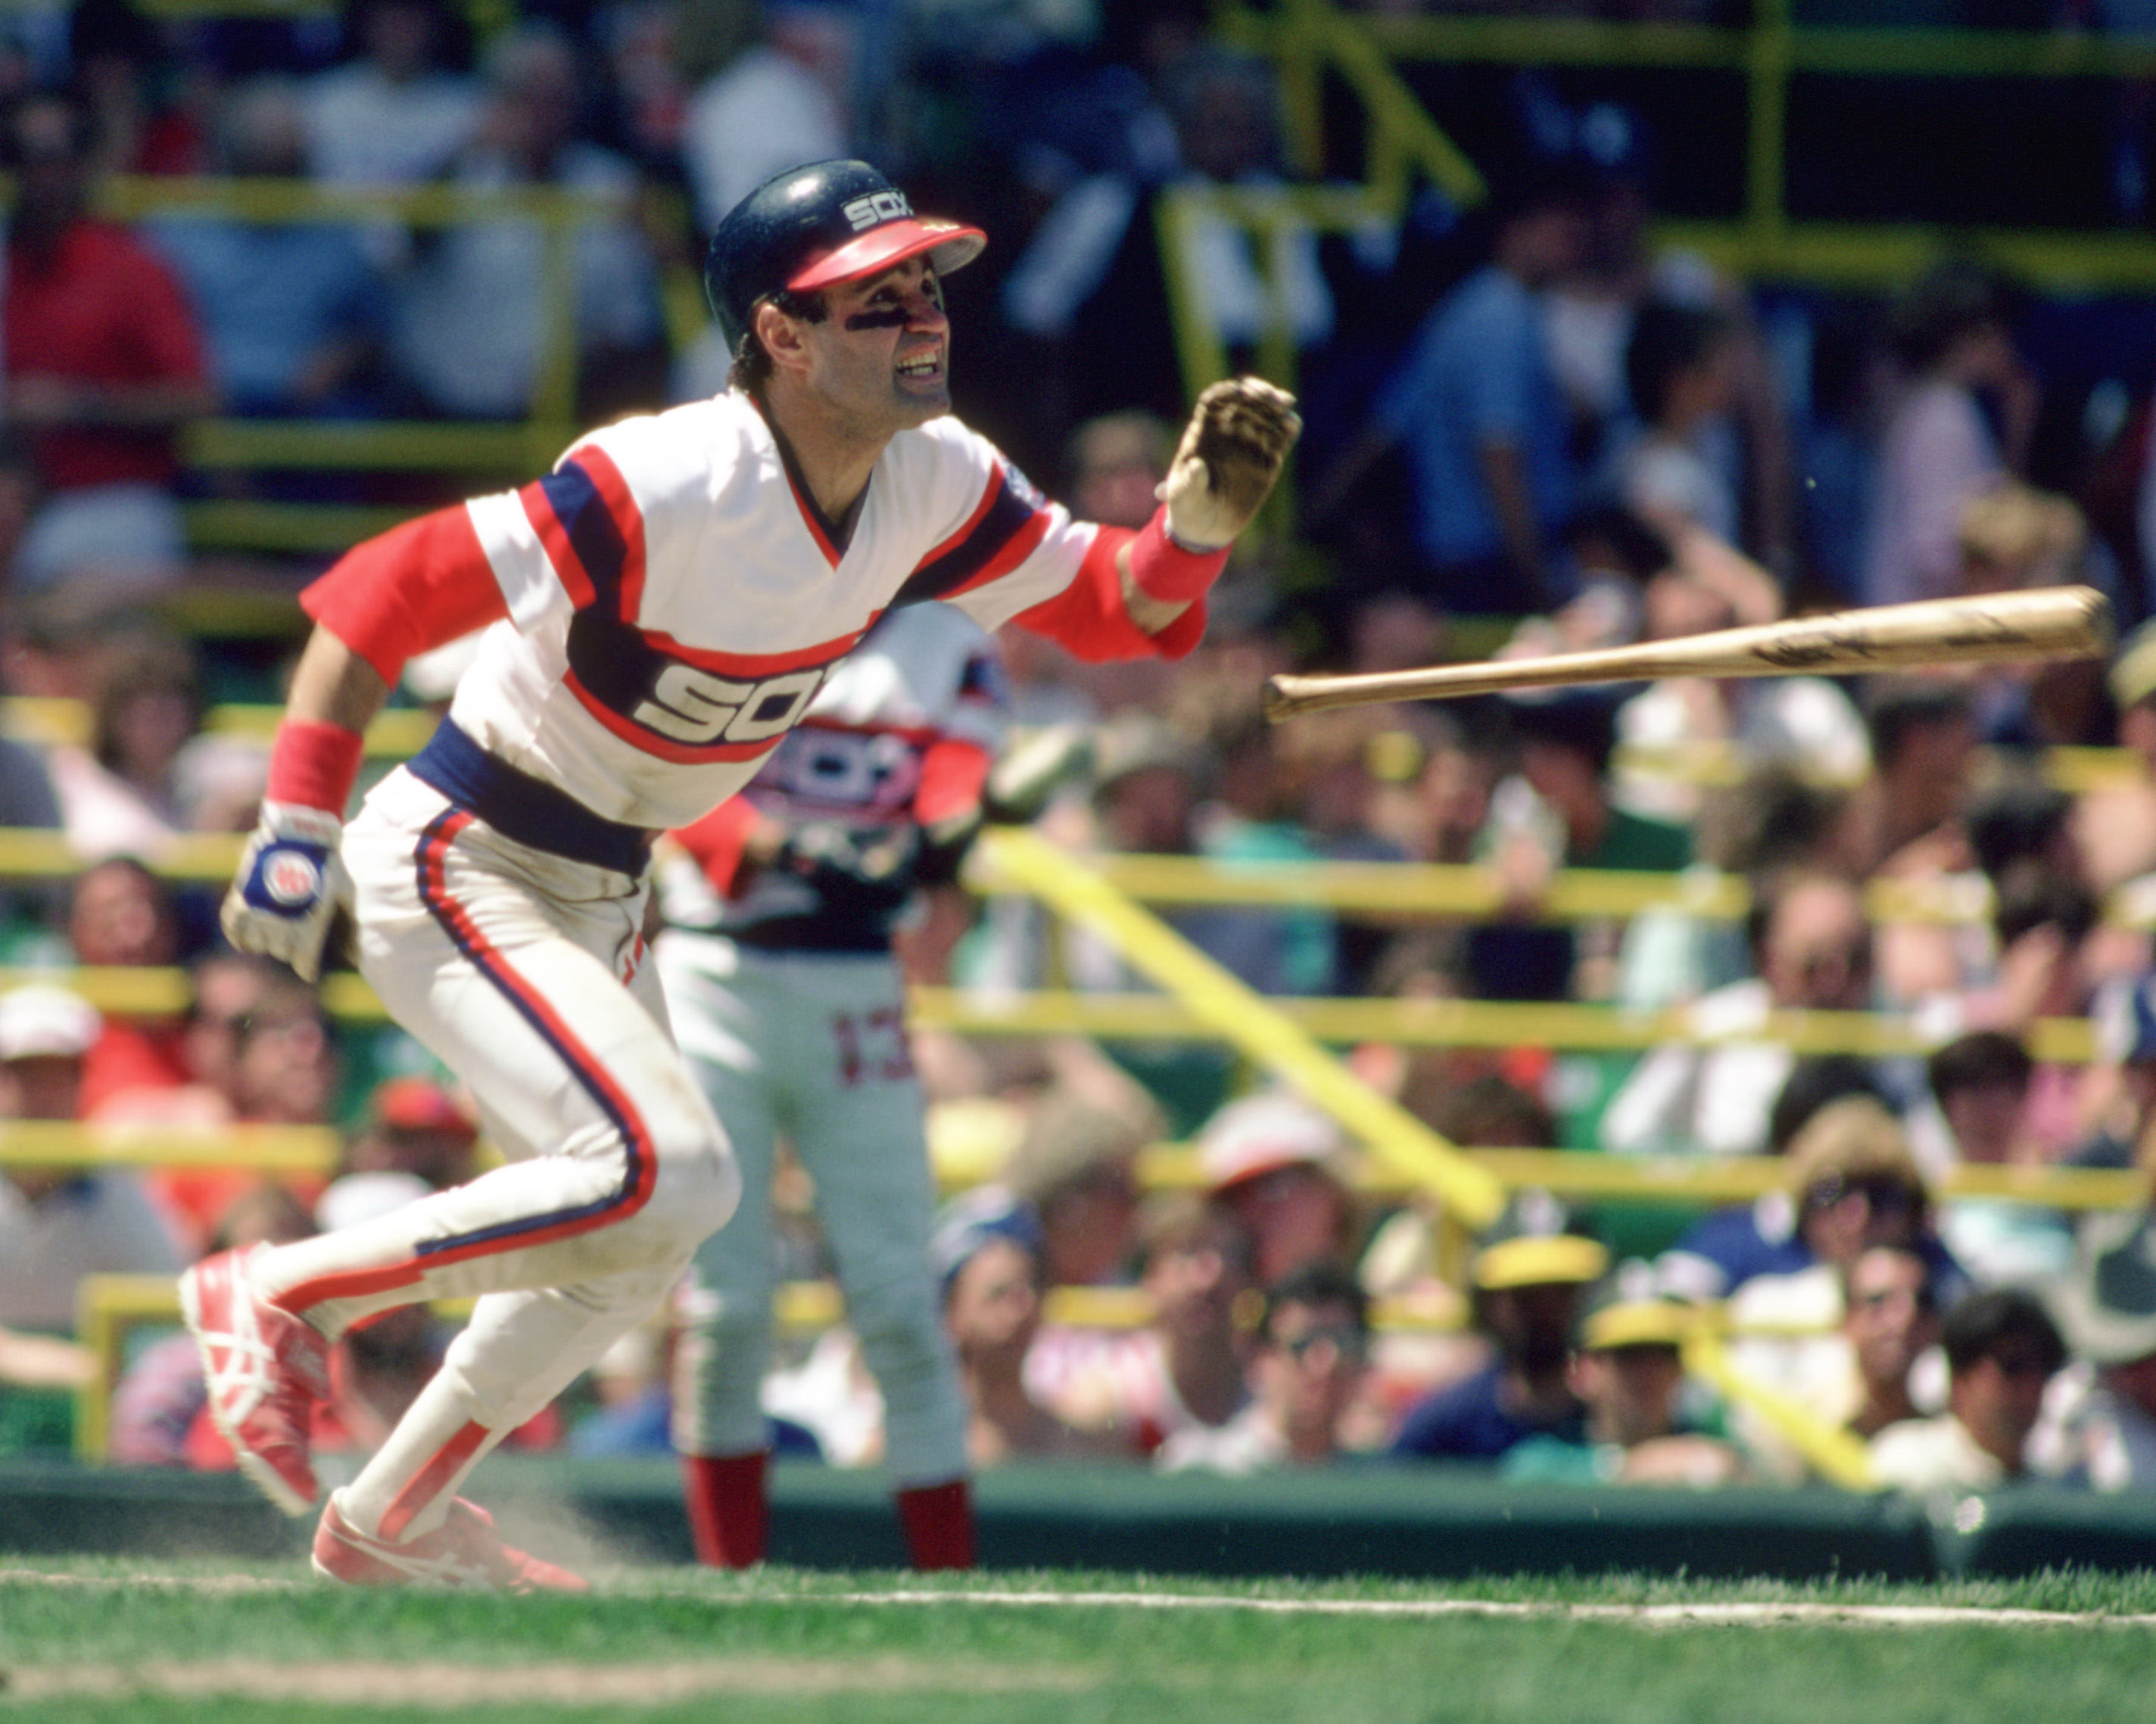 Chicago White Sox hitter Julio Cruz races out of the batter's box during a 1986 game at Comiskey Park in Chicago.